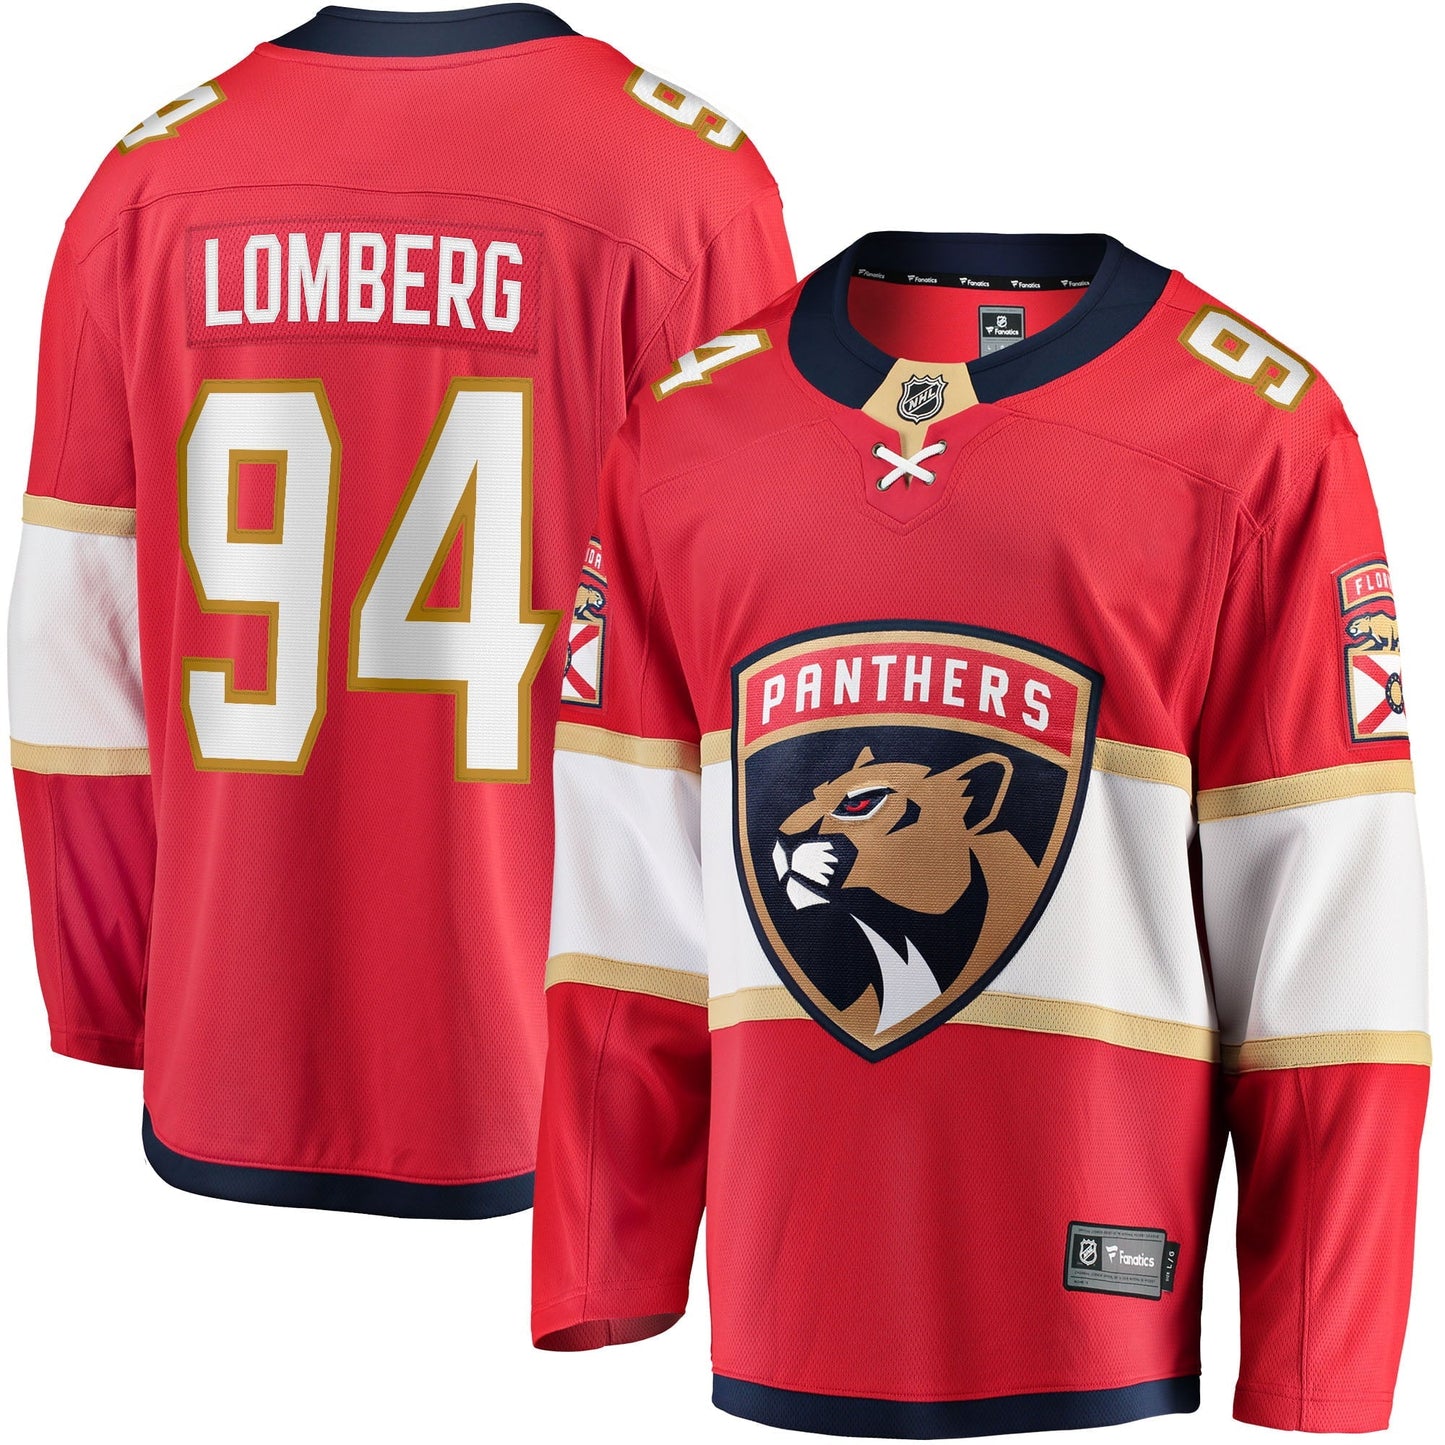 Men's Fanatics Branded Ryan Lomberg Red Florida Panthers Home Breakaway Player Jersey